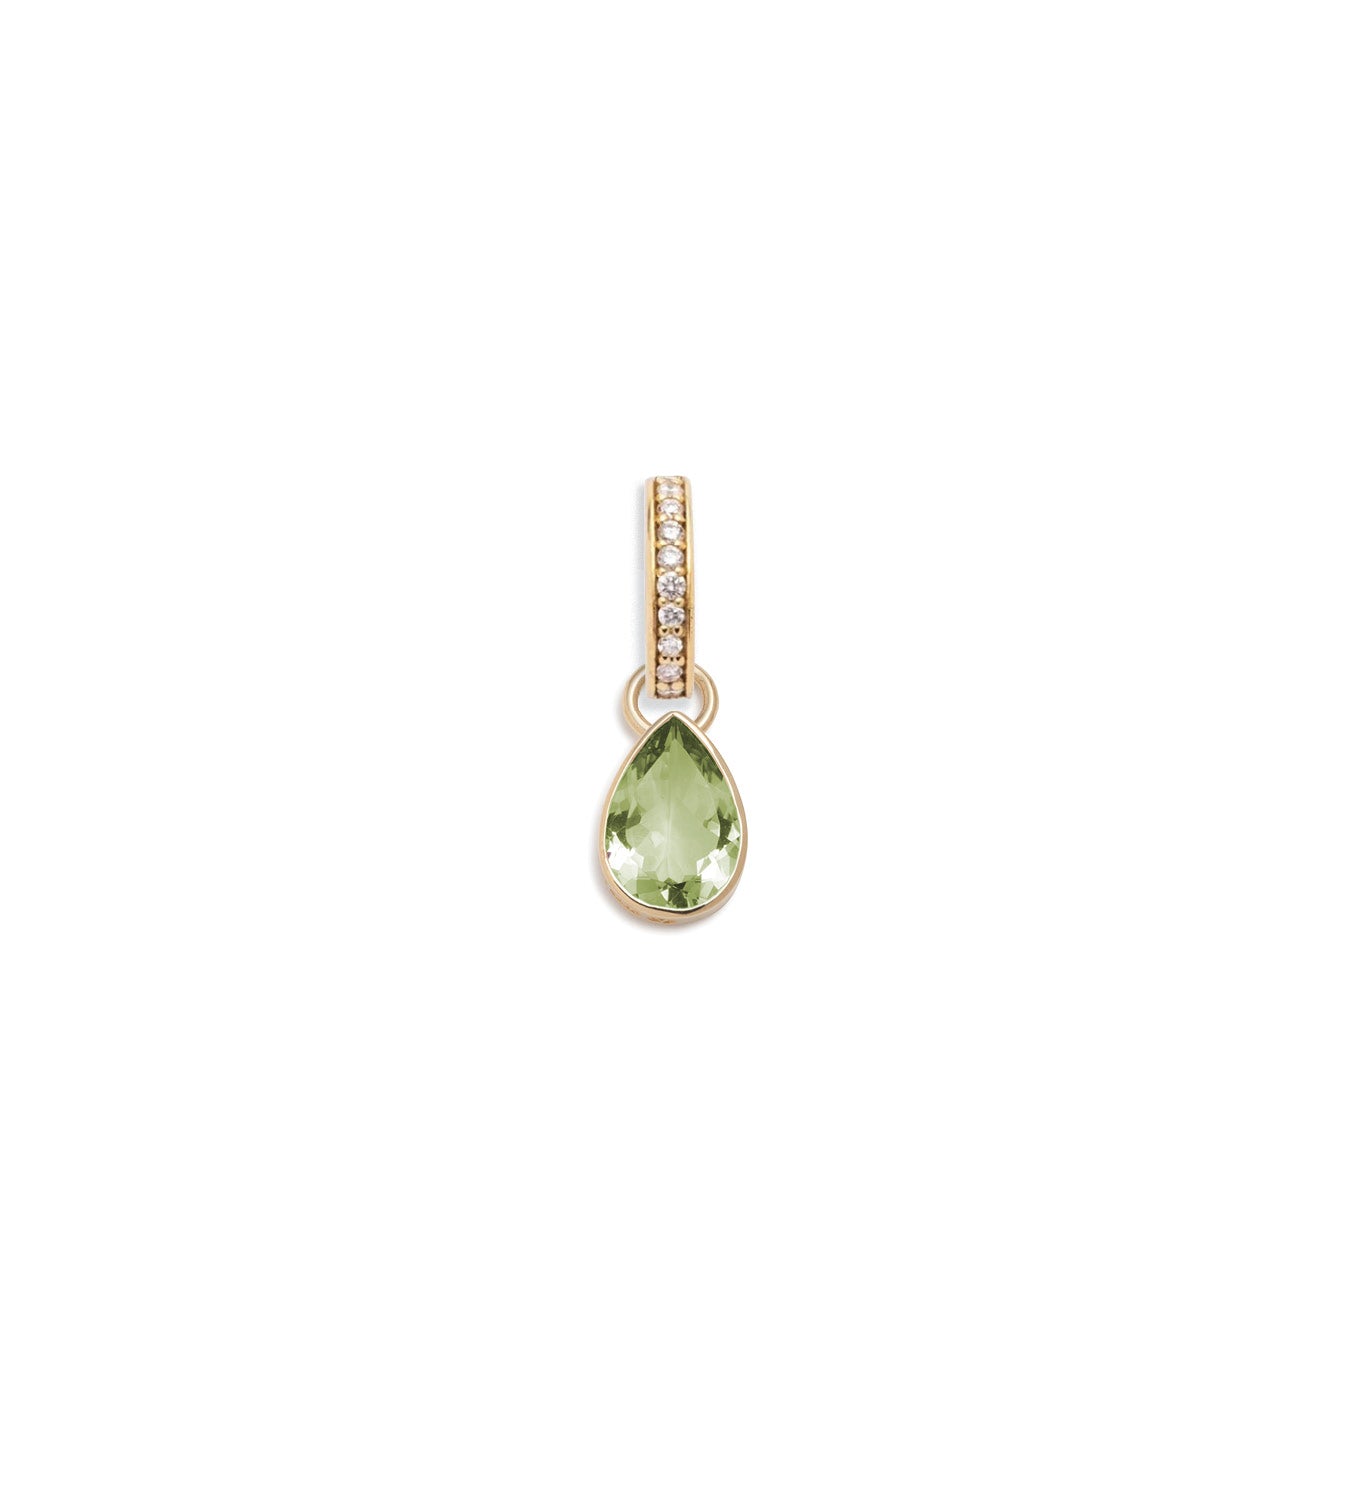 Forever & Always a Pair - Love : 0.65ct Peridot Pear Pendant with Oval Push Gate